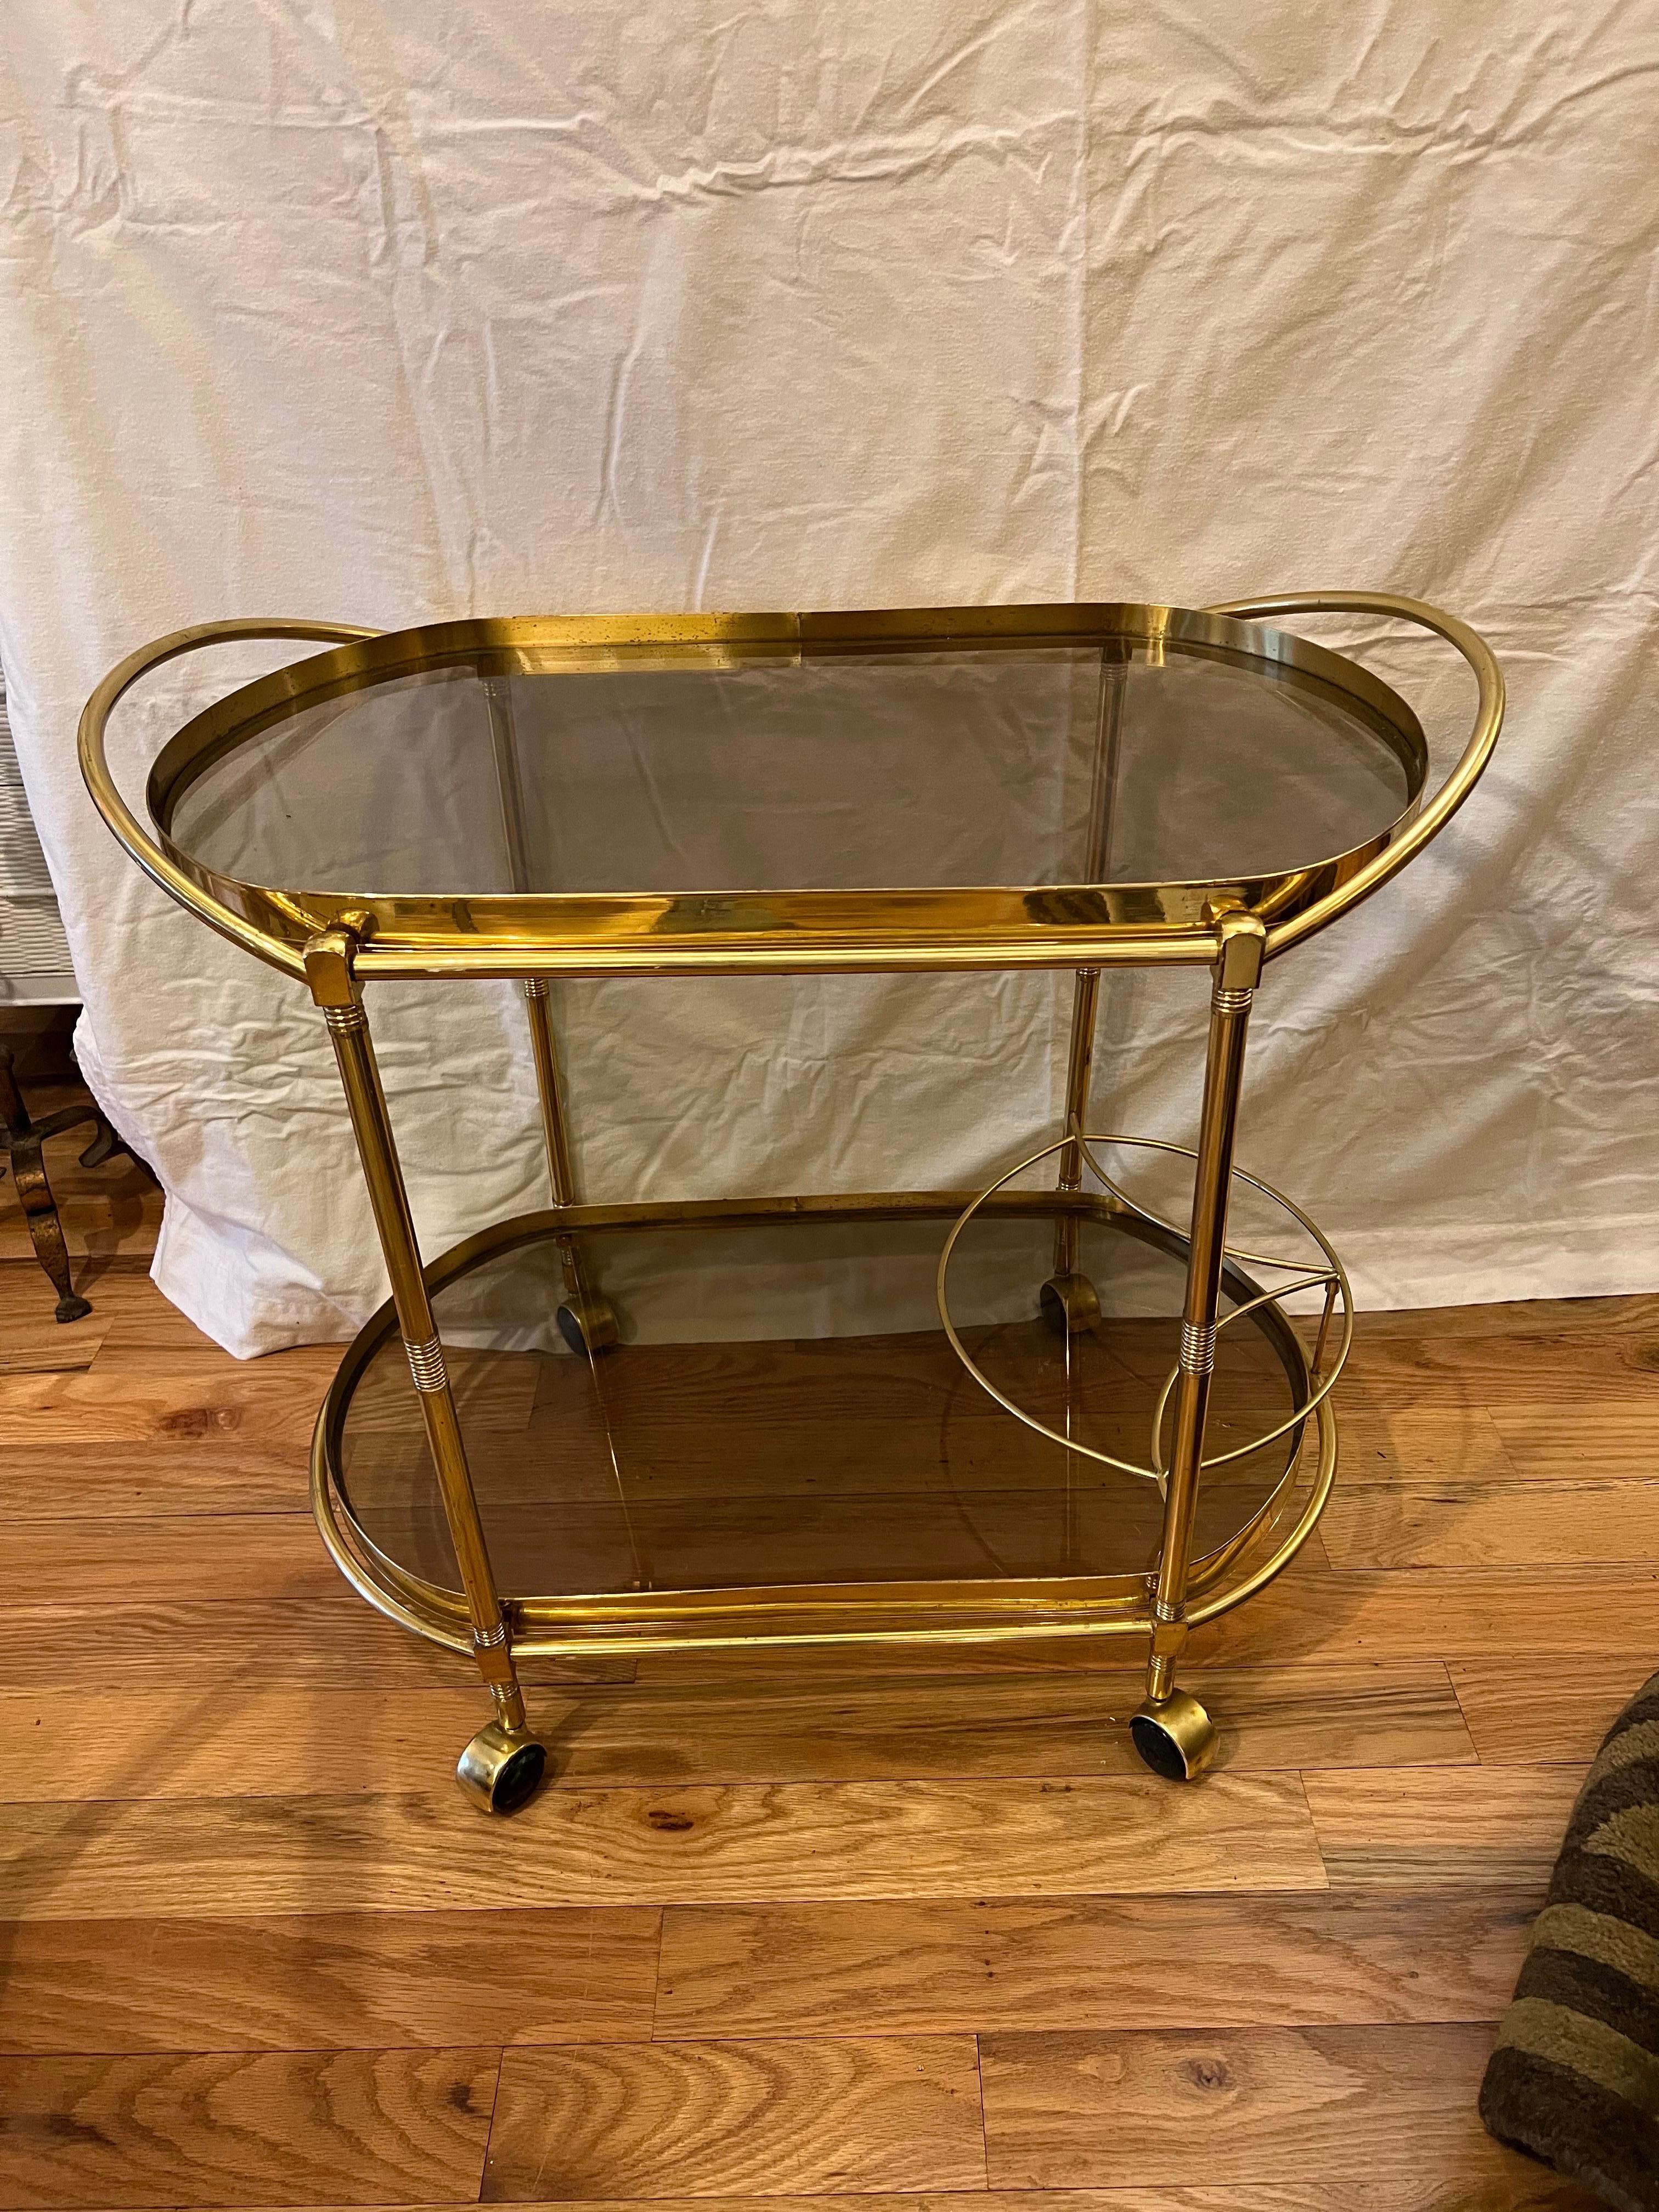 Smoked glass two tiered oval bar cart. Most likely Italian with its sleek and sexy lines. This Hollywood Regency style smoked glass and brass two tier bar cart has a bottle holder on the lower tier. Elegant oval shape with a handle to push and brass